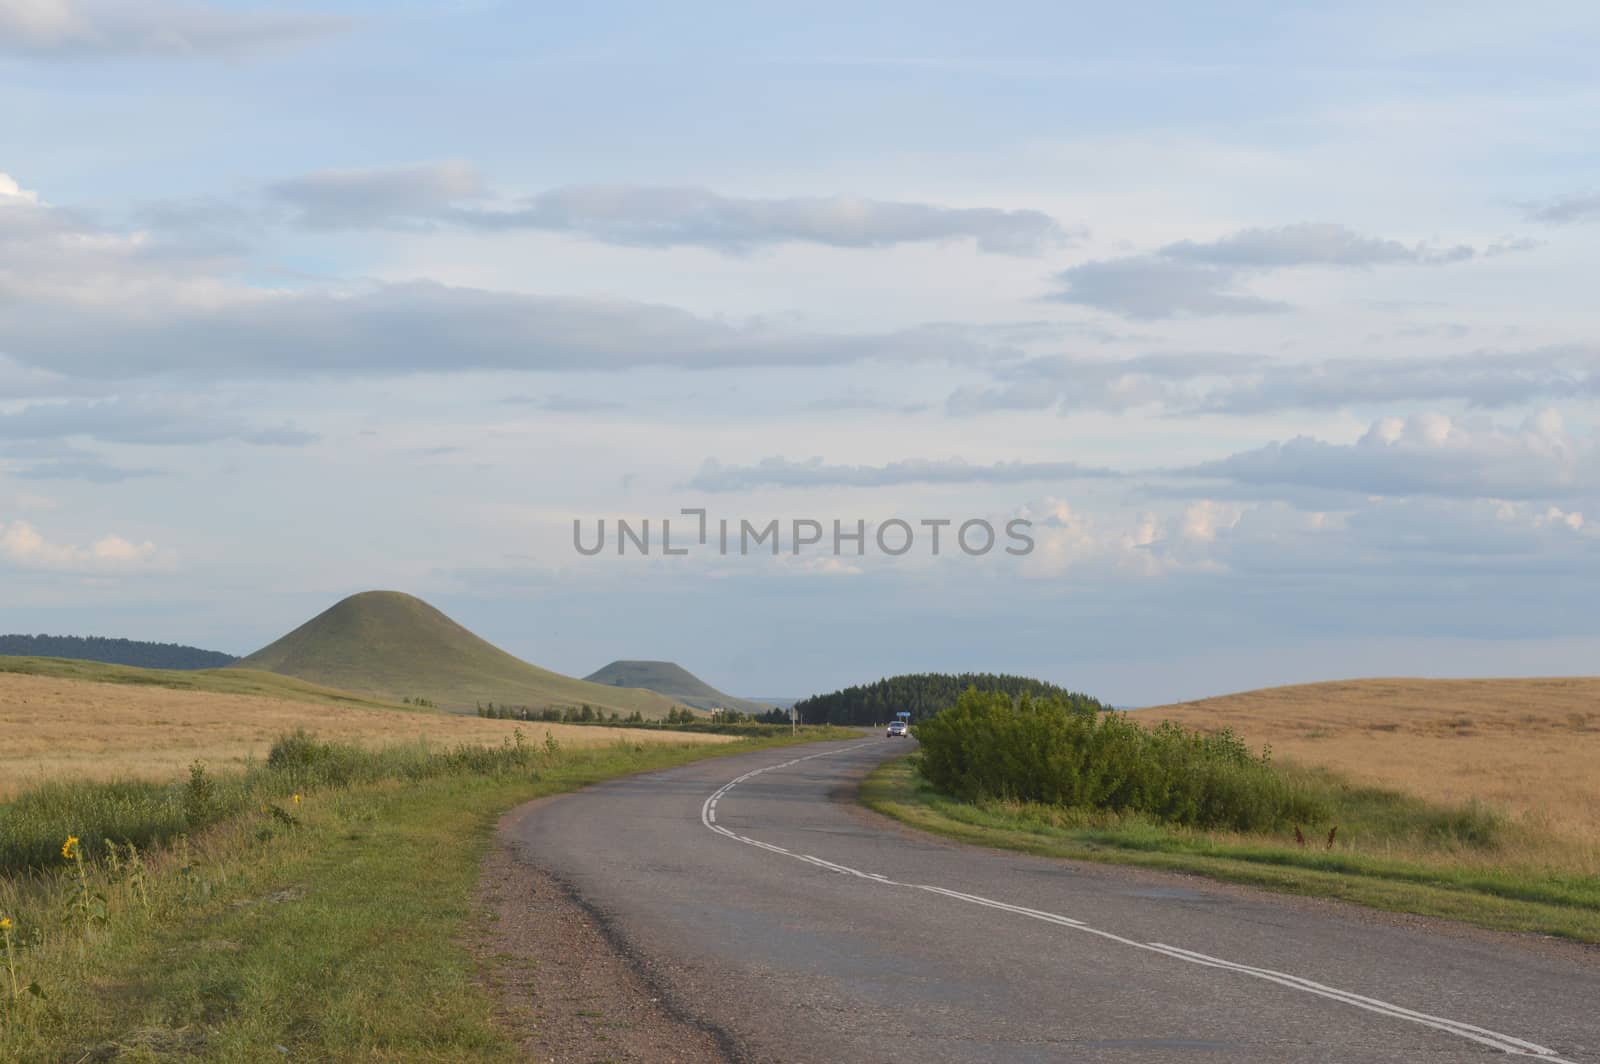 summer landscape with road, mountain and blue sky with clouds